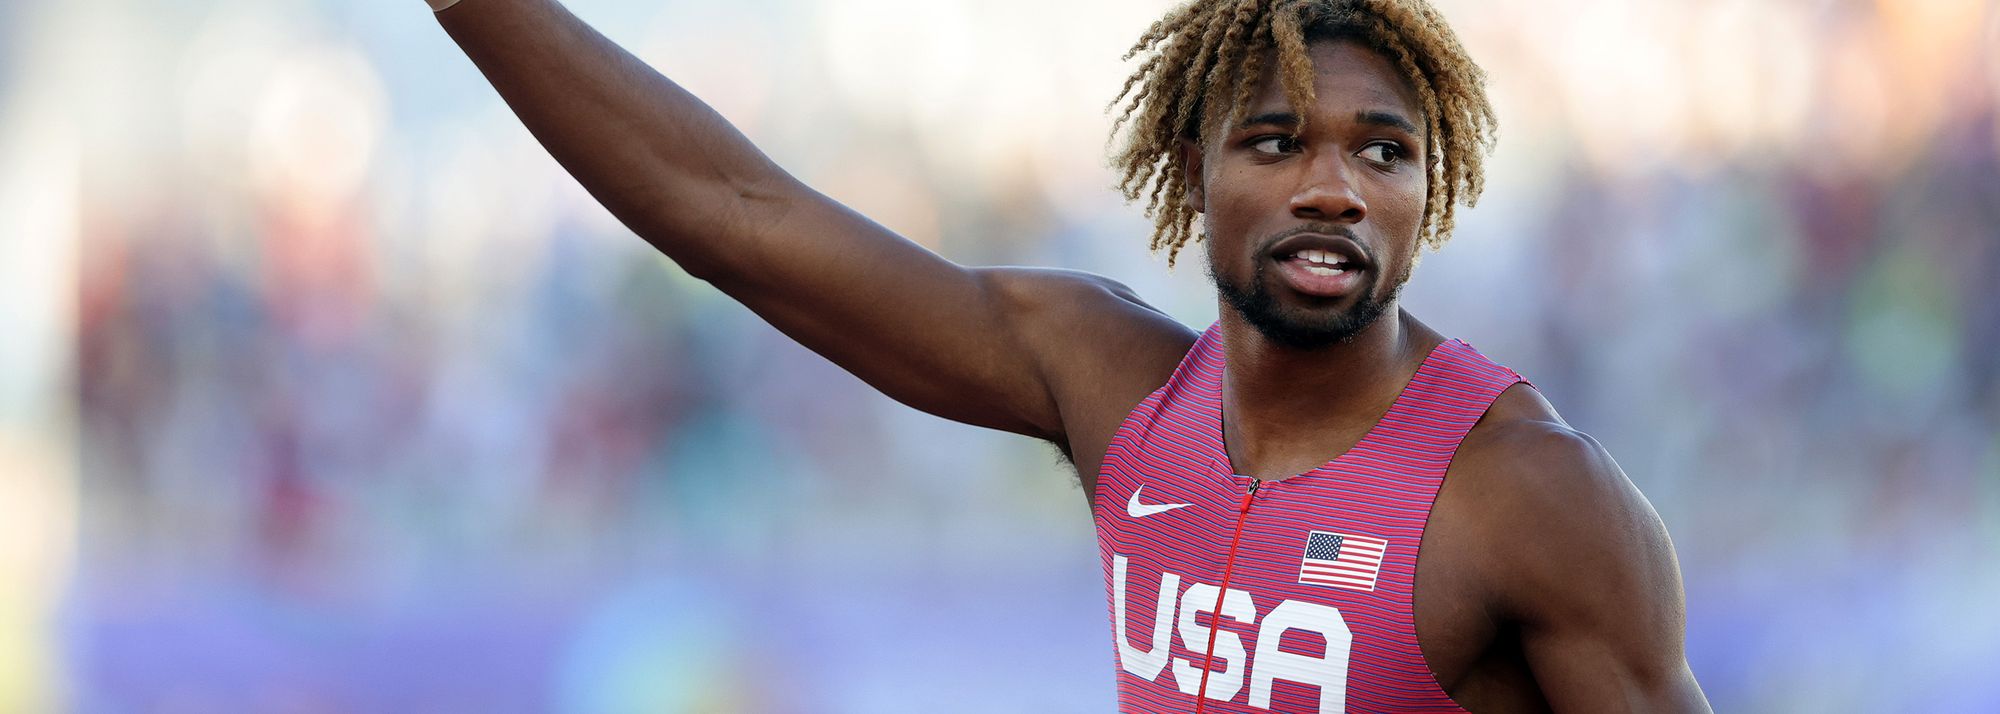 Noah Lyles claimed his second world 200m title in Oregon, and he did it in style.